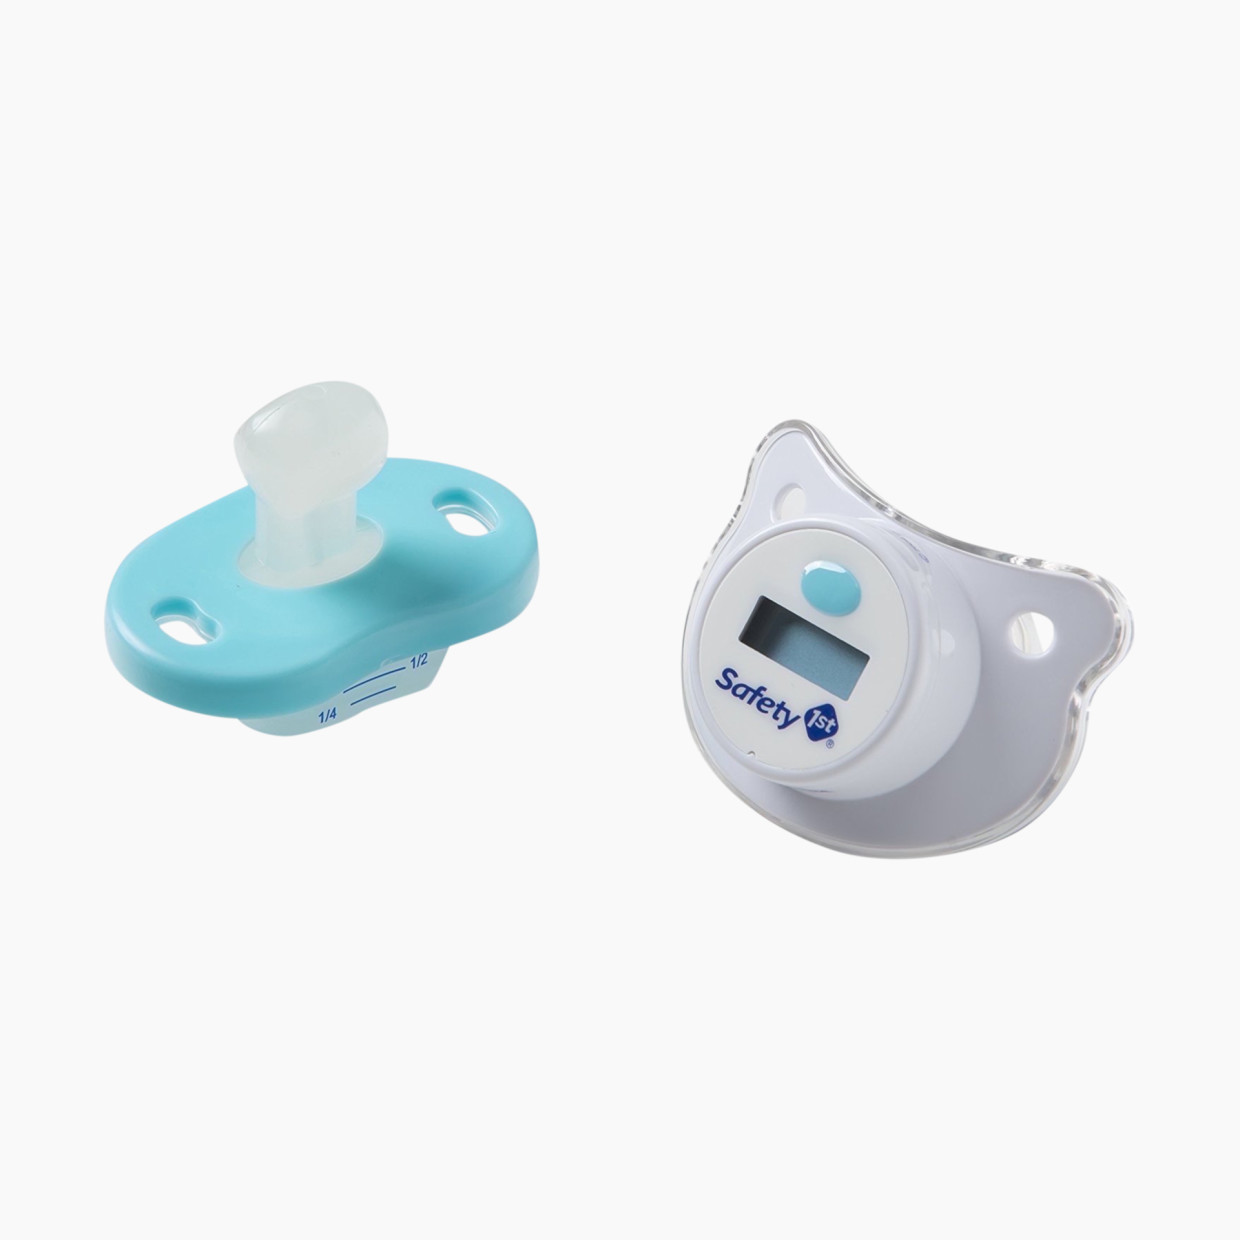 Safety 1st Comfort Check Pacifier Thermometer.